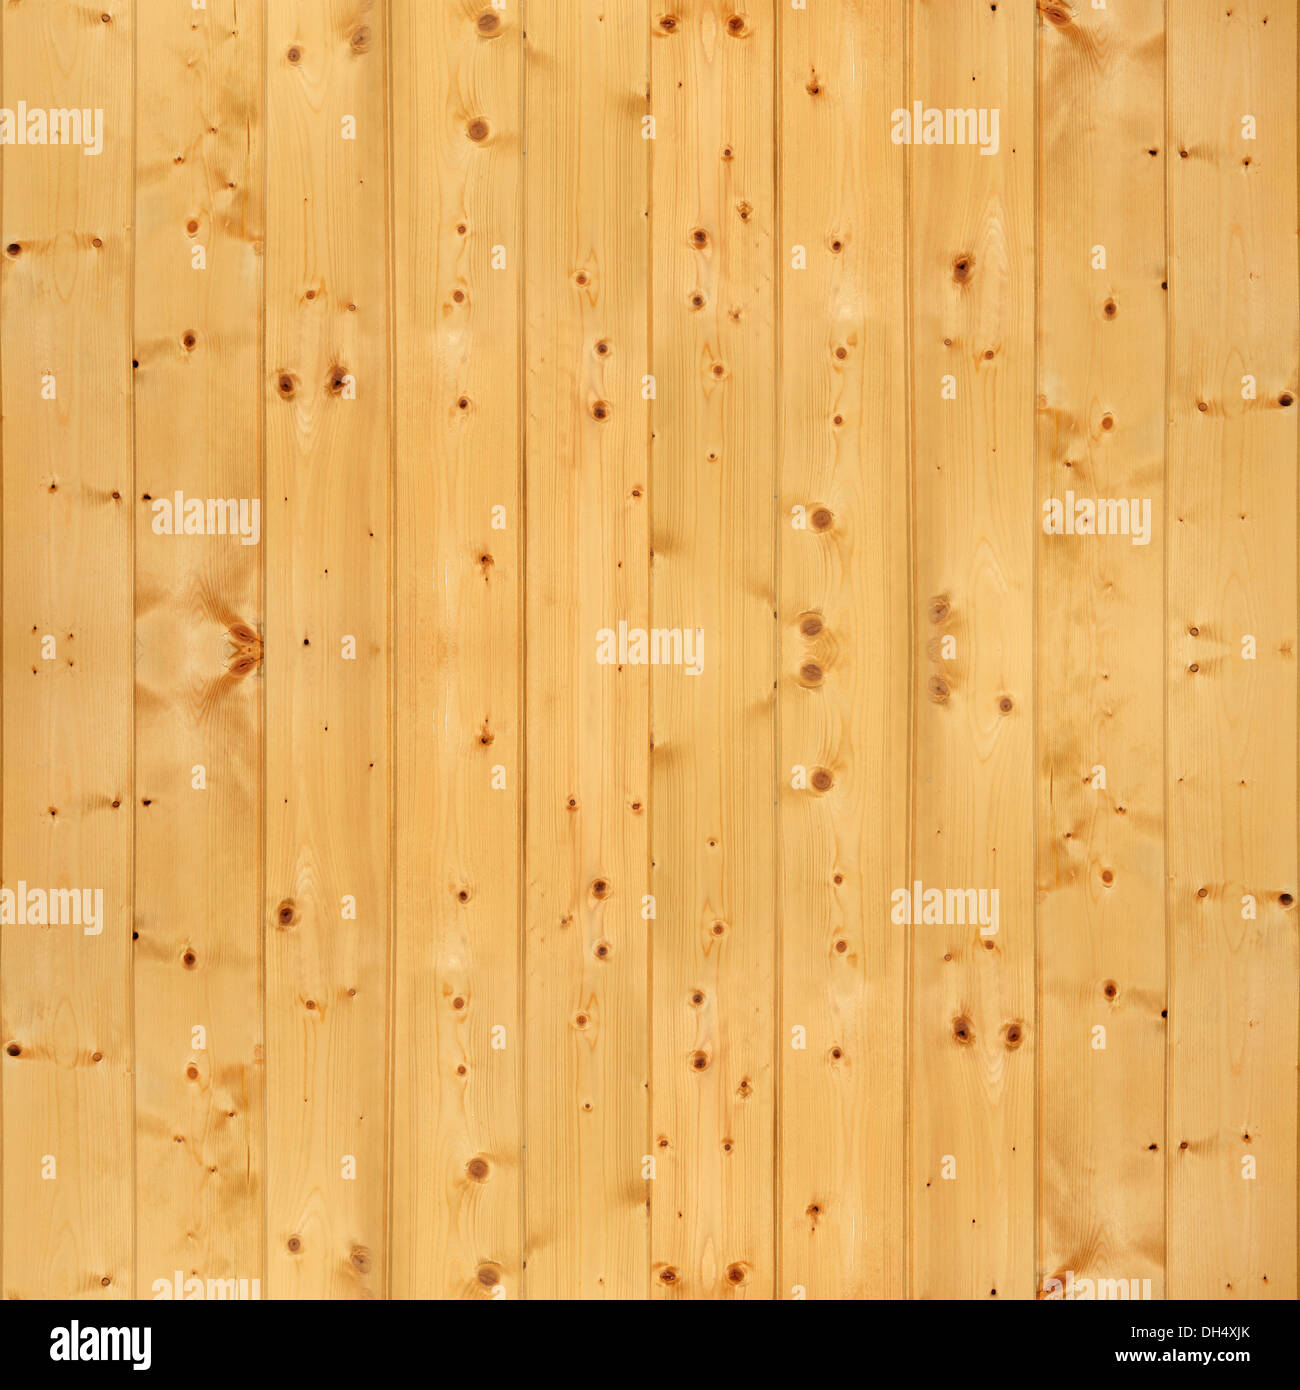 Tileable  wood texture with veins and knots Stock Photo